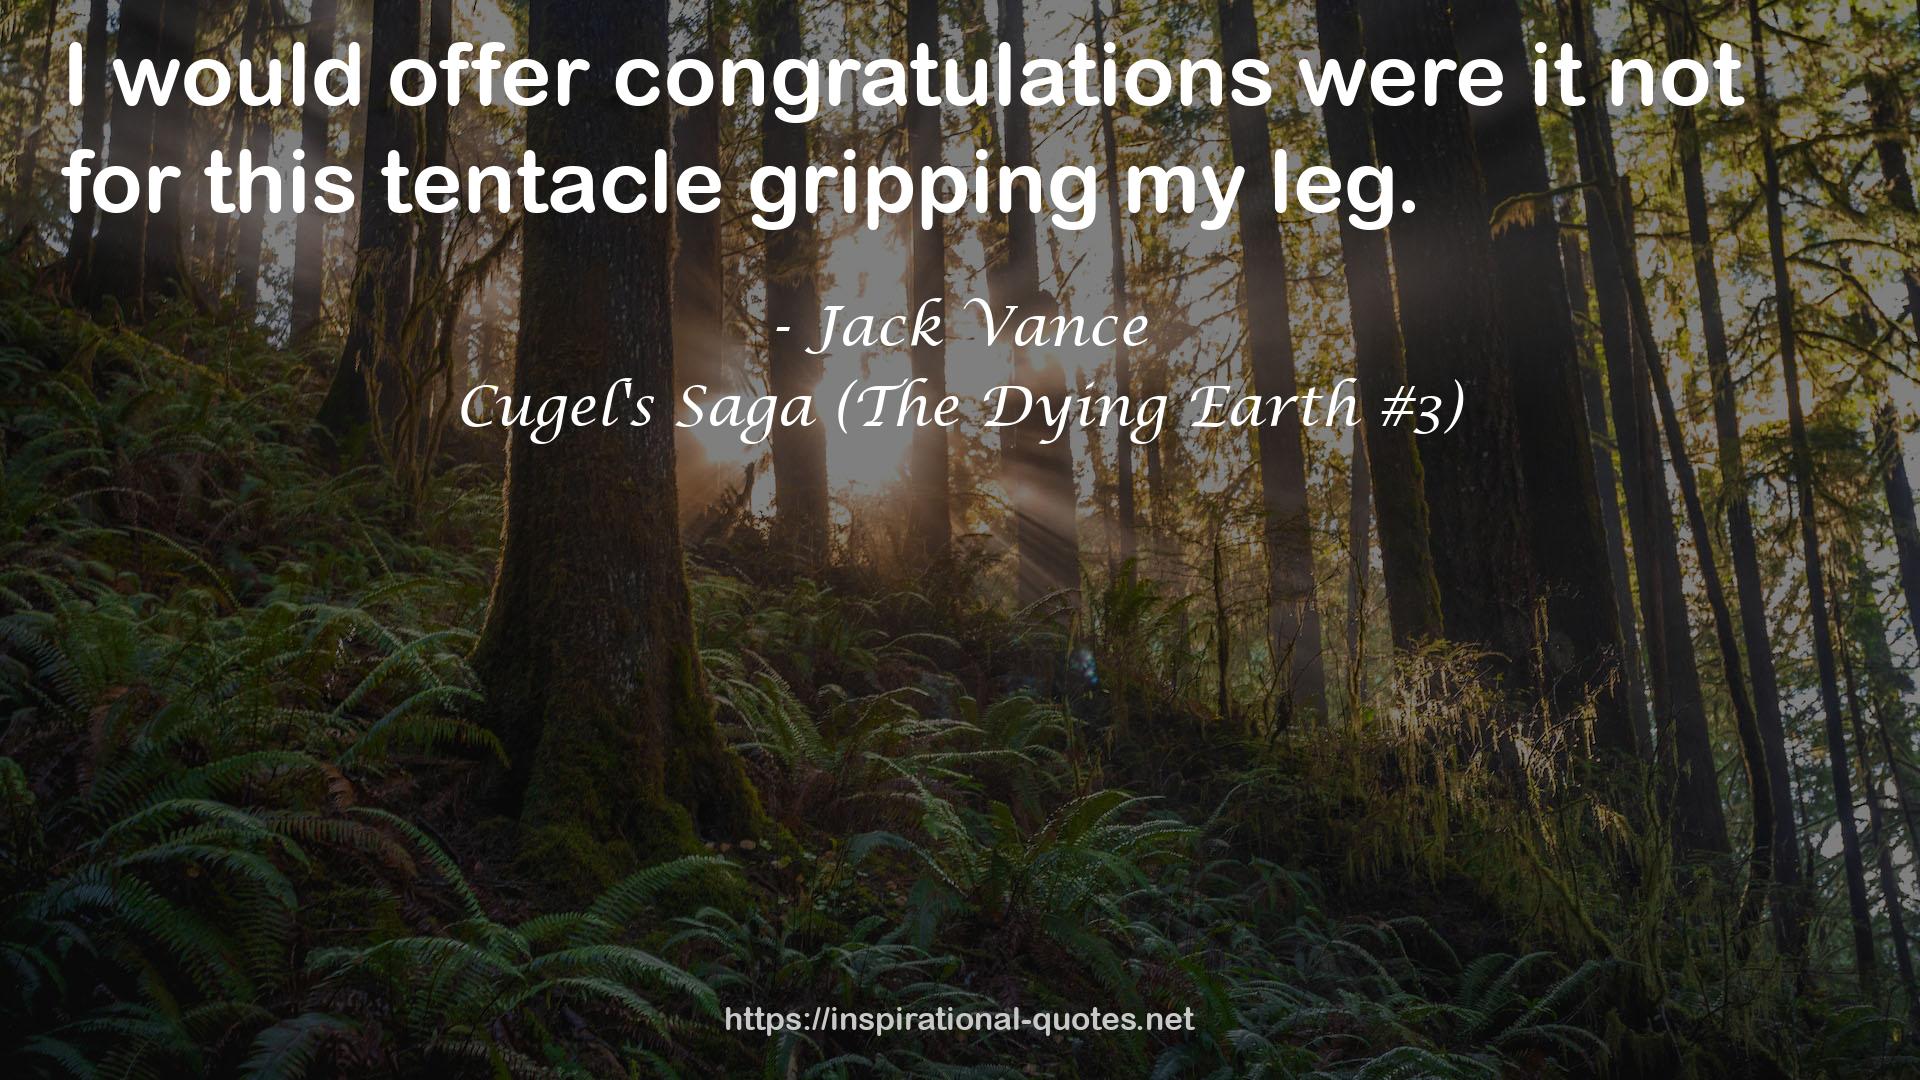 Cugel's Saga (The Dying Earth #3) QUOTES